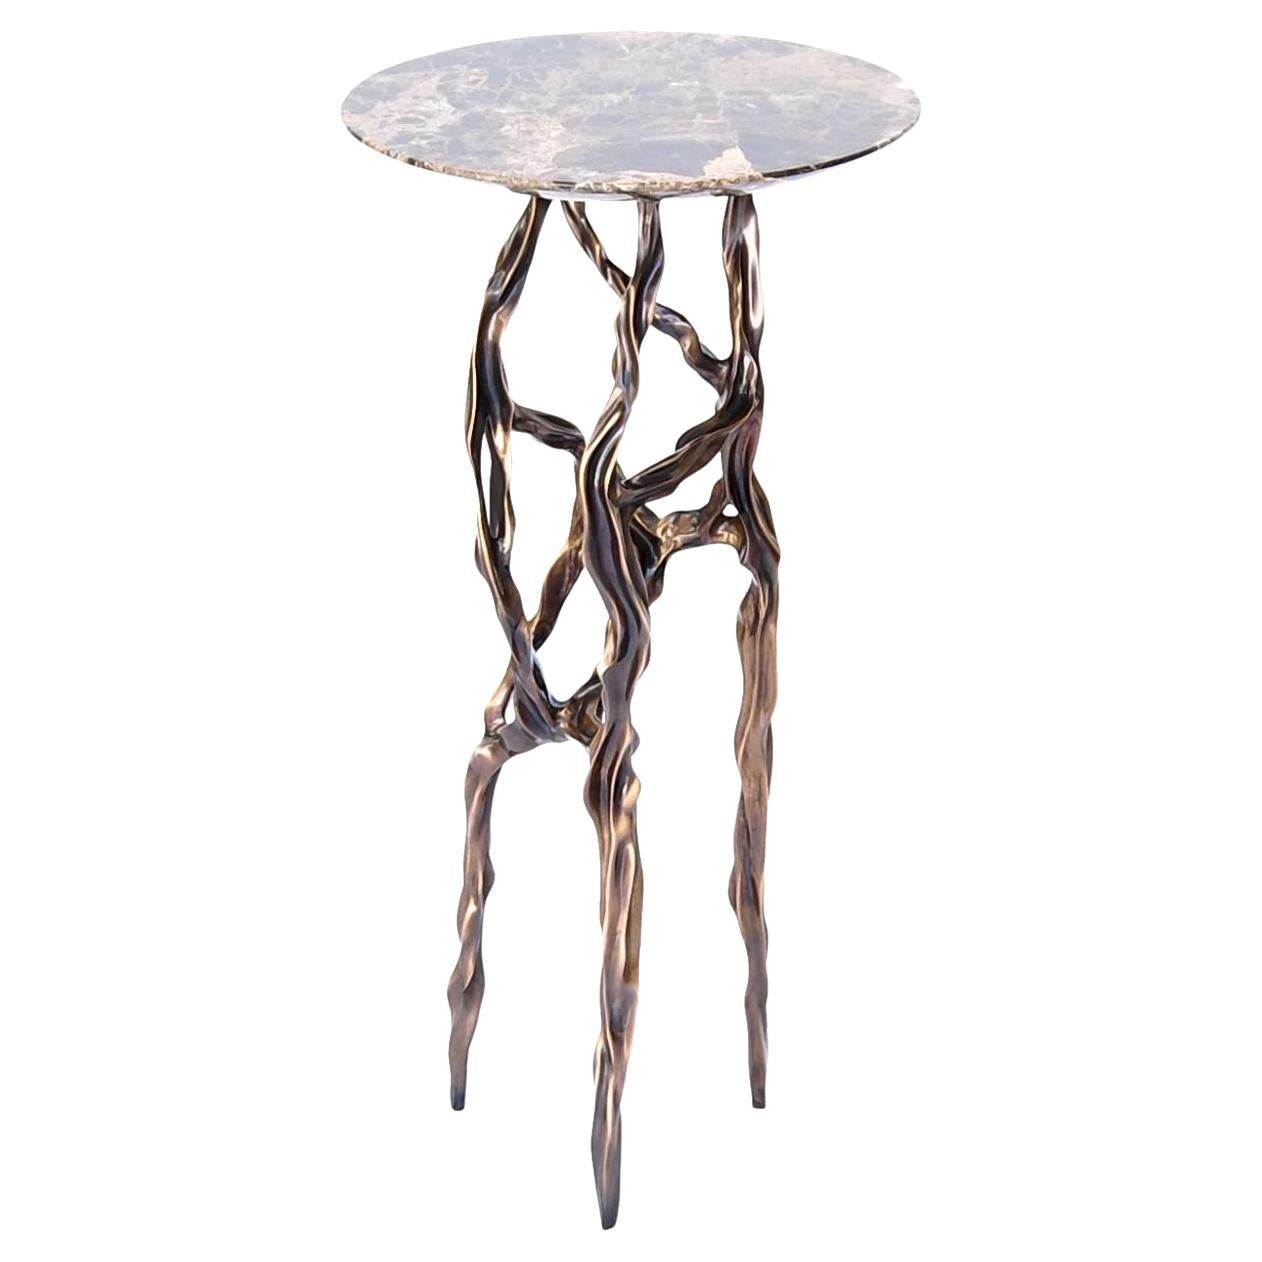 Alexia Drink Table with Marrom Imperial Marble Top by Fakasaka Design